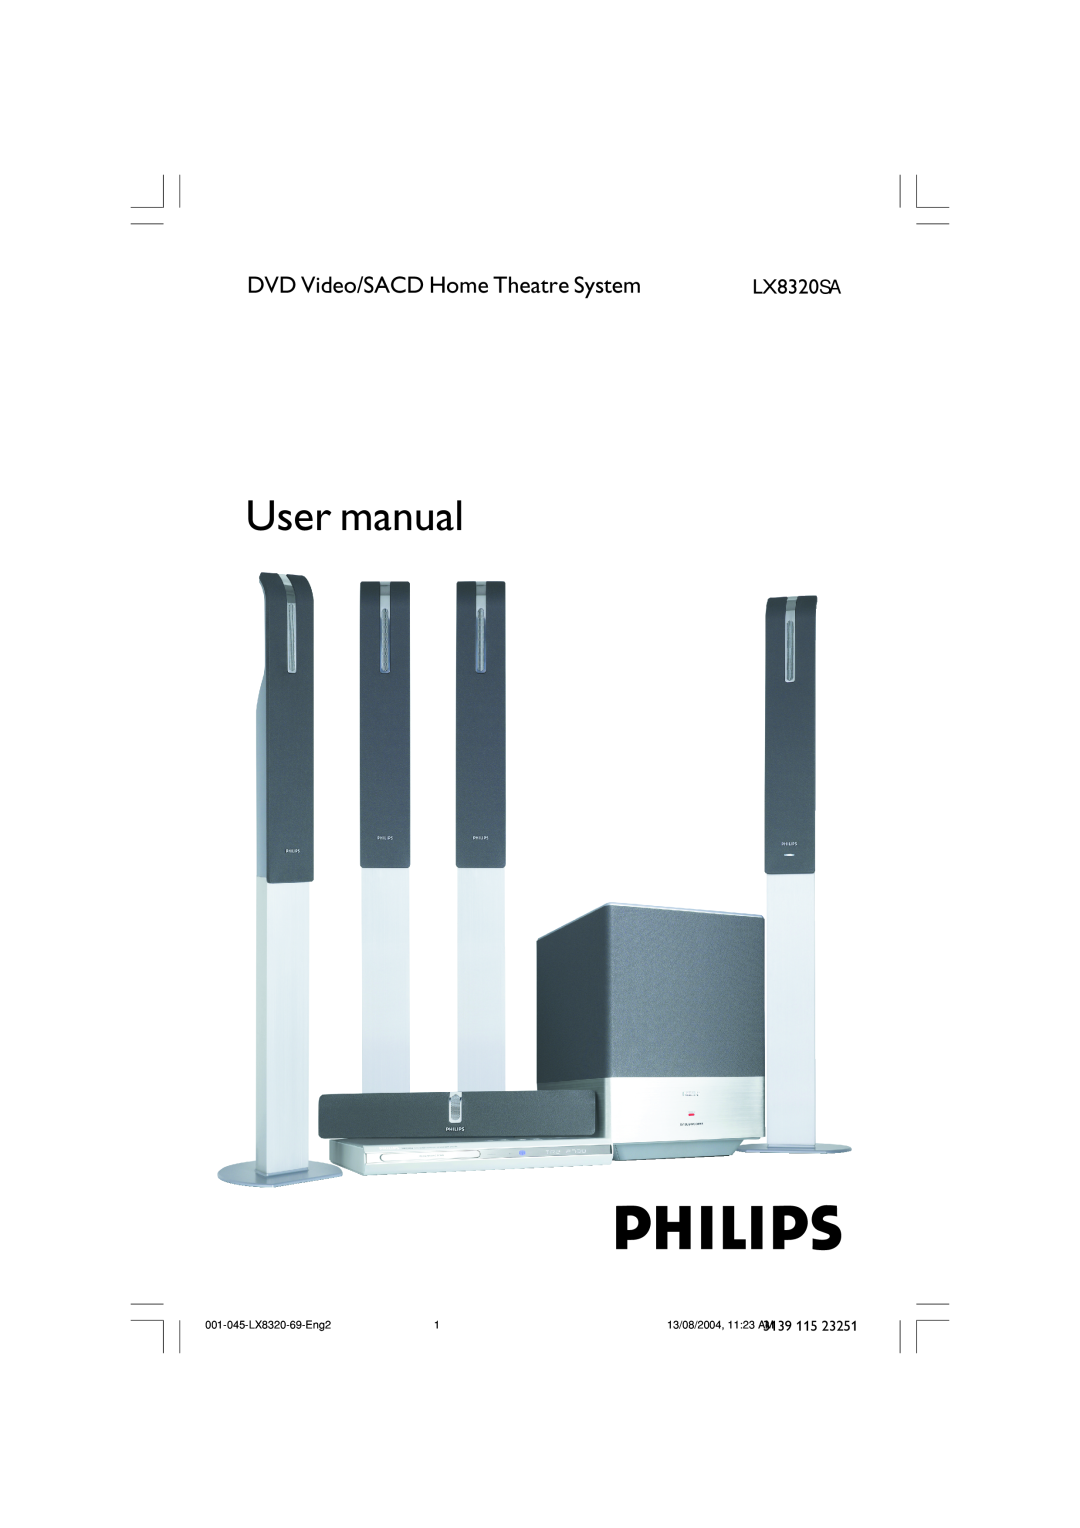 Philips LX8320SA user manual DVD Video/SACD Home Theatre System, 001-045-LX8320-69-Eng2, 13/08/2004, 11 23 AM 